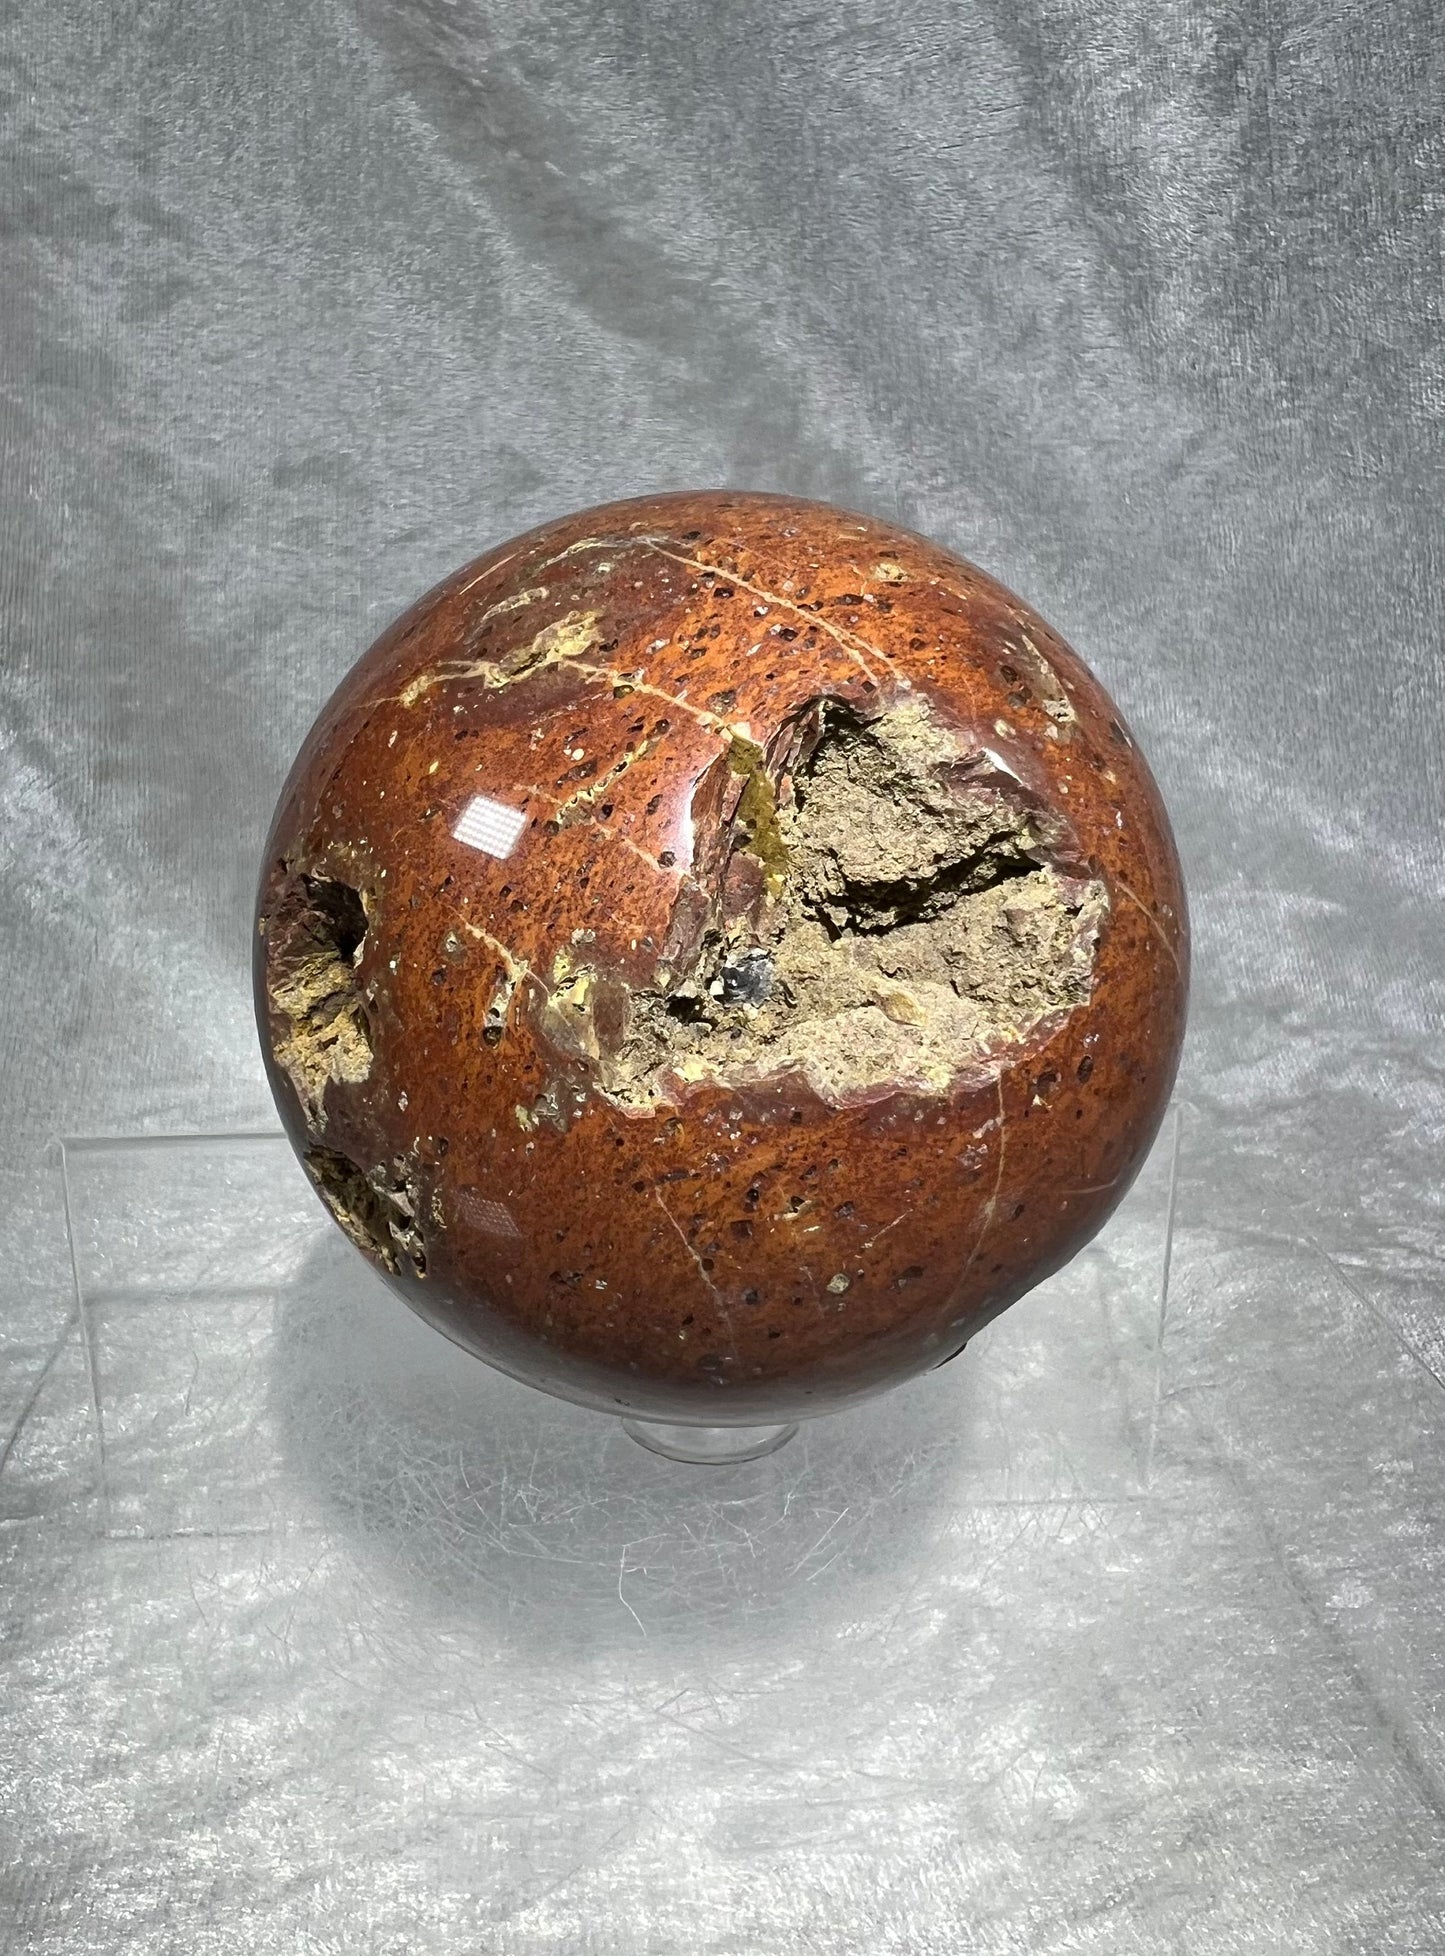 Amazing Druzy Warring States Red Agate Sphere. 77mm. Crazy Botryoidal Nodules. Insane Looking Display Sphere.